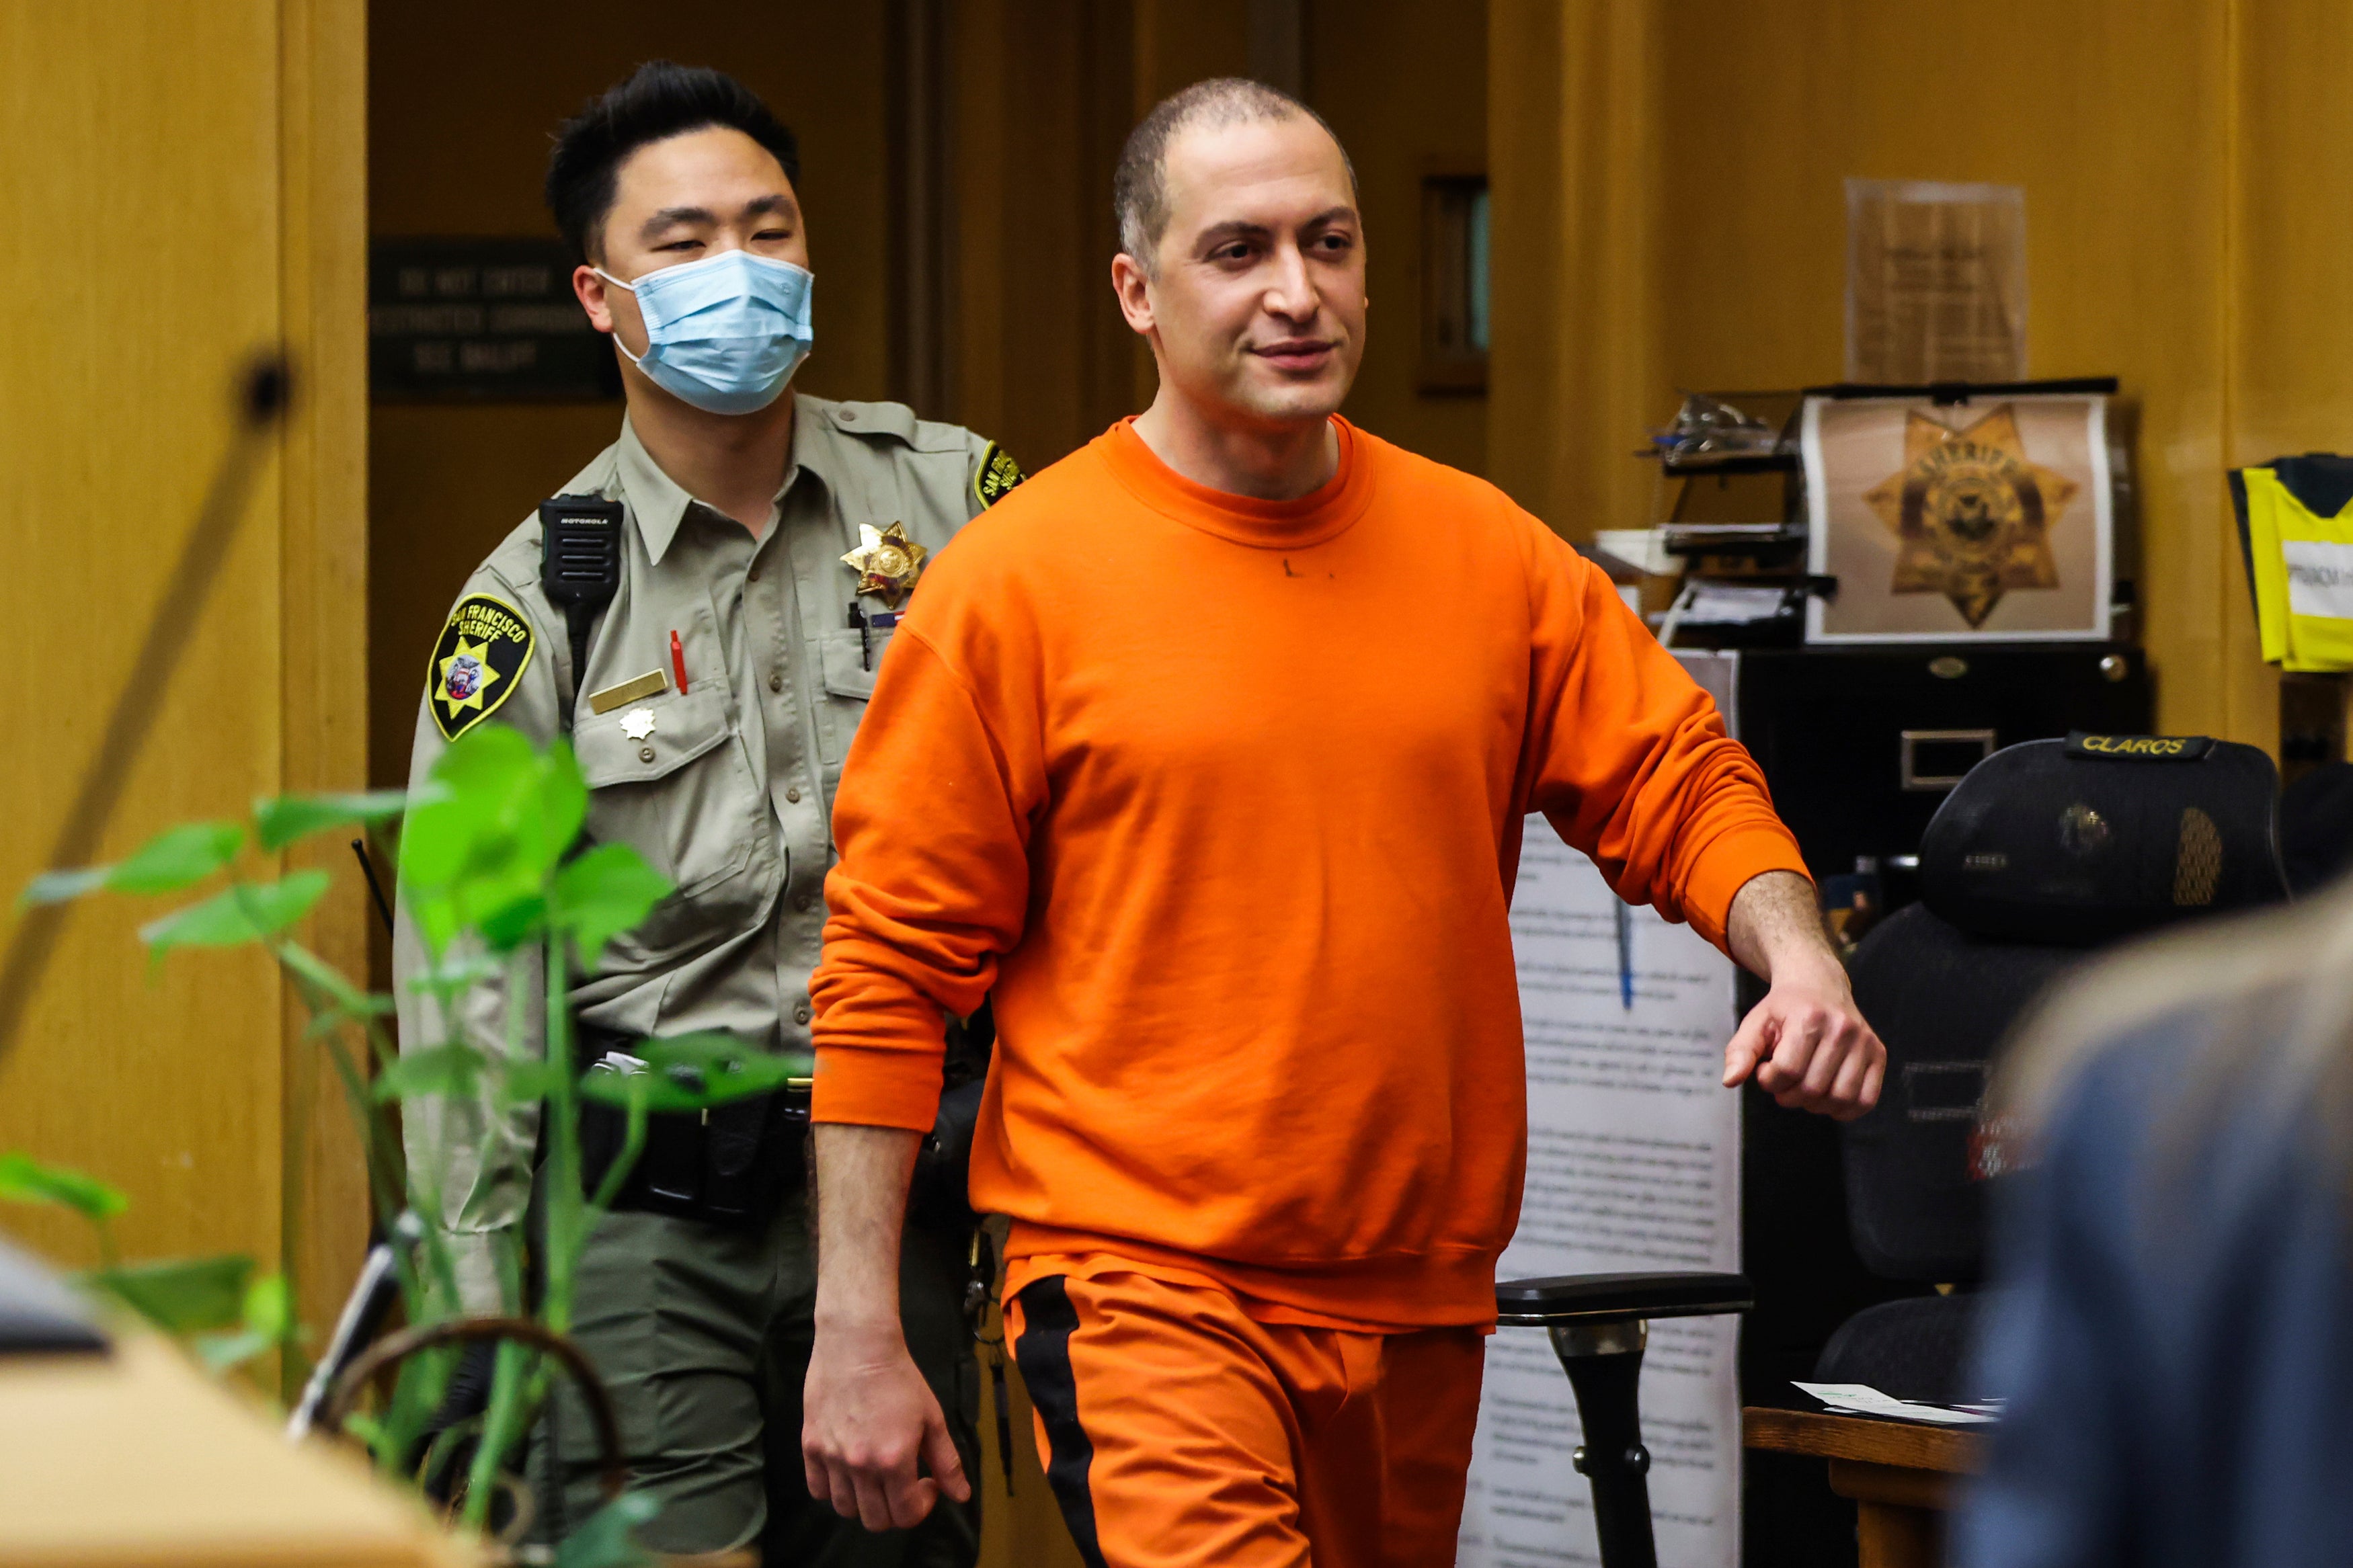 Nima Momeni, the man charged in the fatal stabbing of Cash App founder Bob Lee, makes his way into the courtroom for his arraignment in San Francisco on 2 May